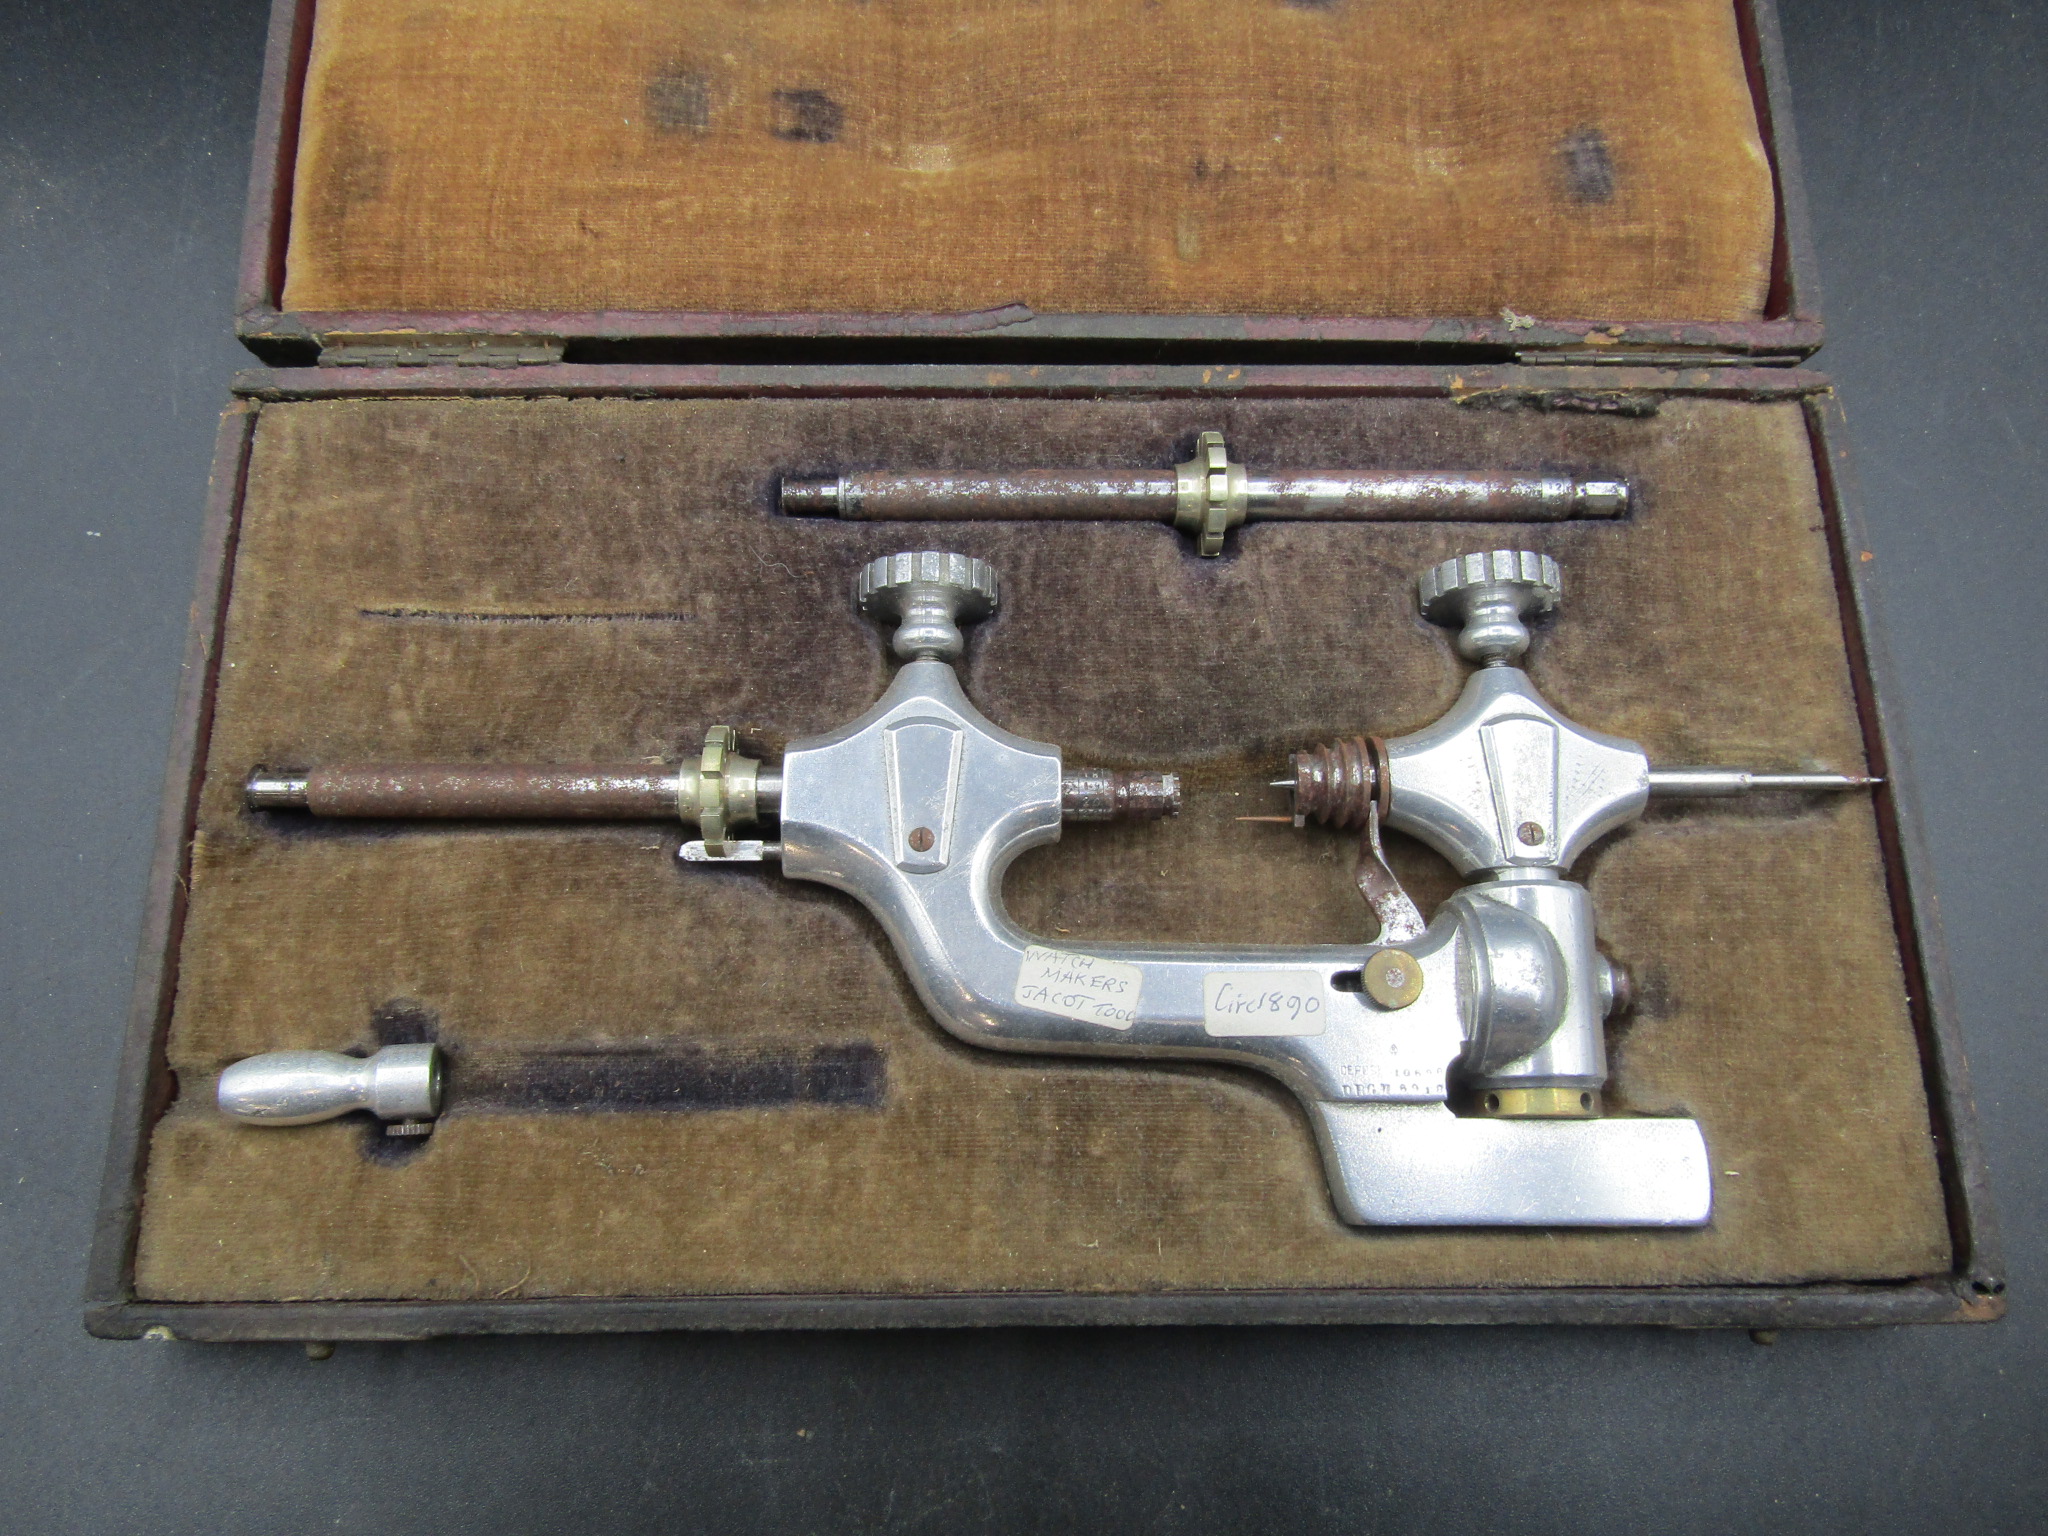 Late 19th century French Watchmakers Jacot or "Tour A Pivoter" (Lathe) tool in original case